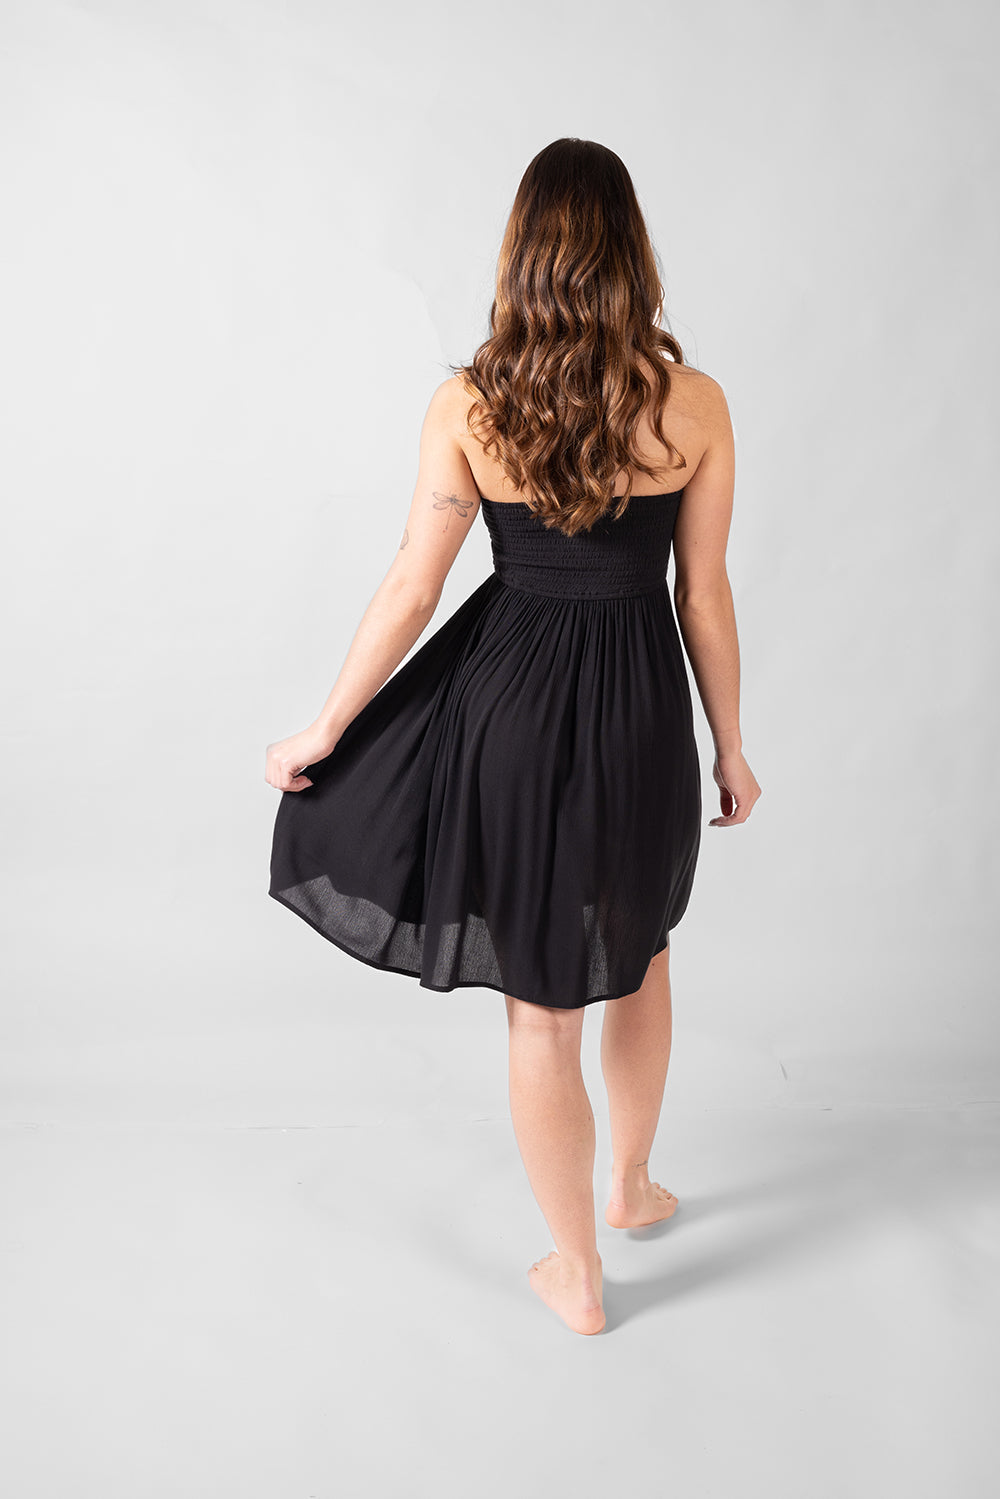 the back of a dark hair woman in a black bandeau beach mini dress with one hand holding the edge of the dress 